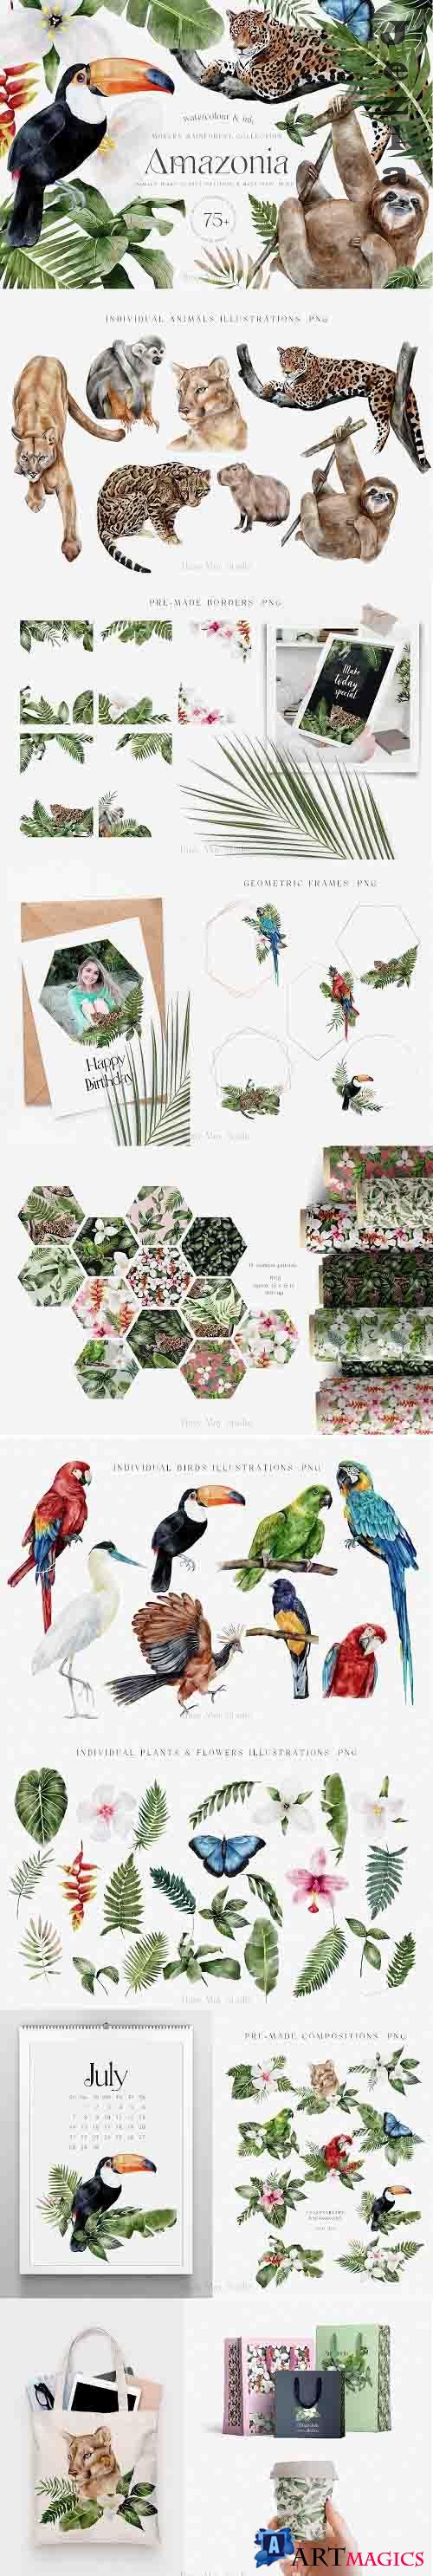 Tropical Rainforest Illustrations Collection and Patterns - 1408970